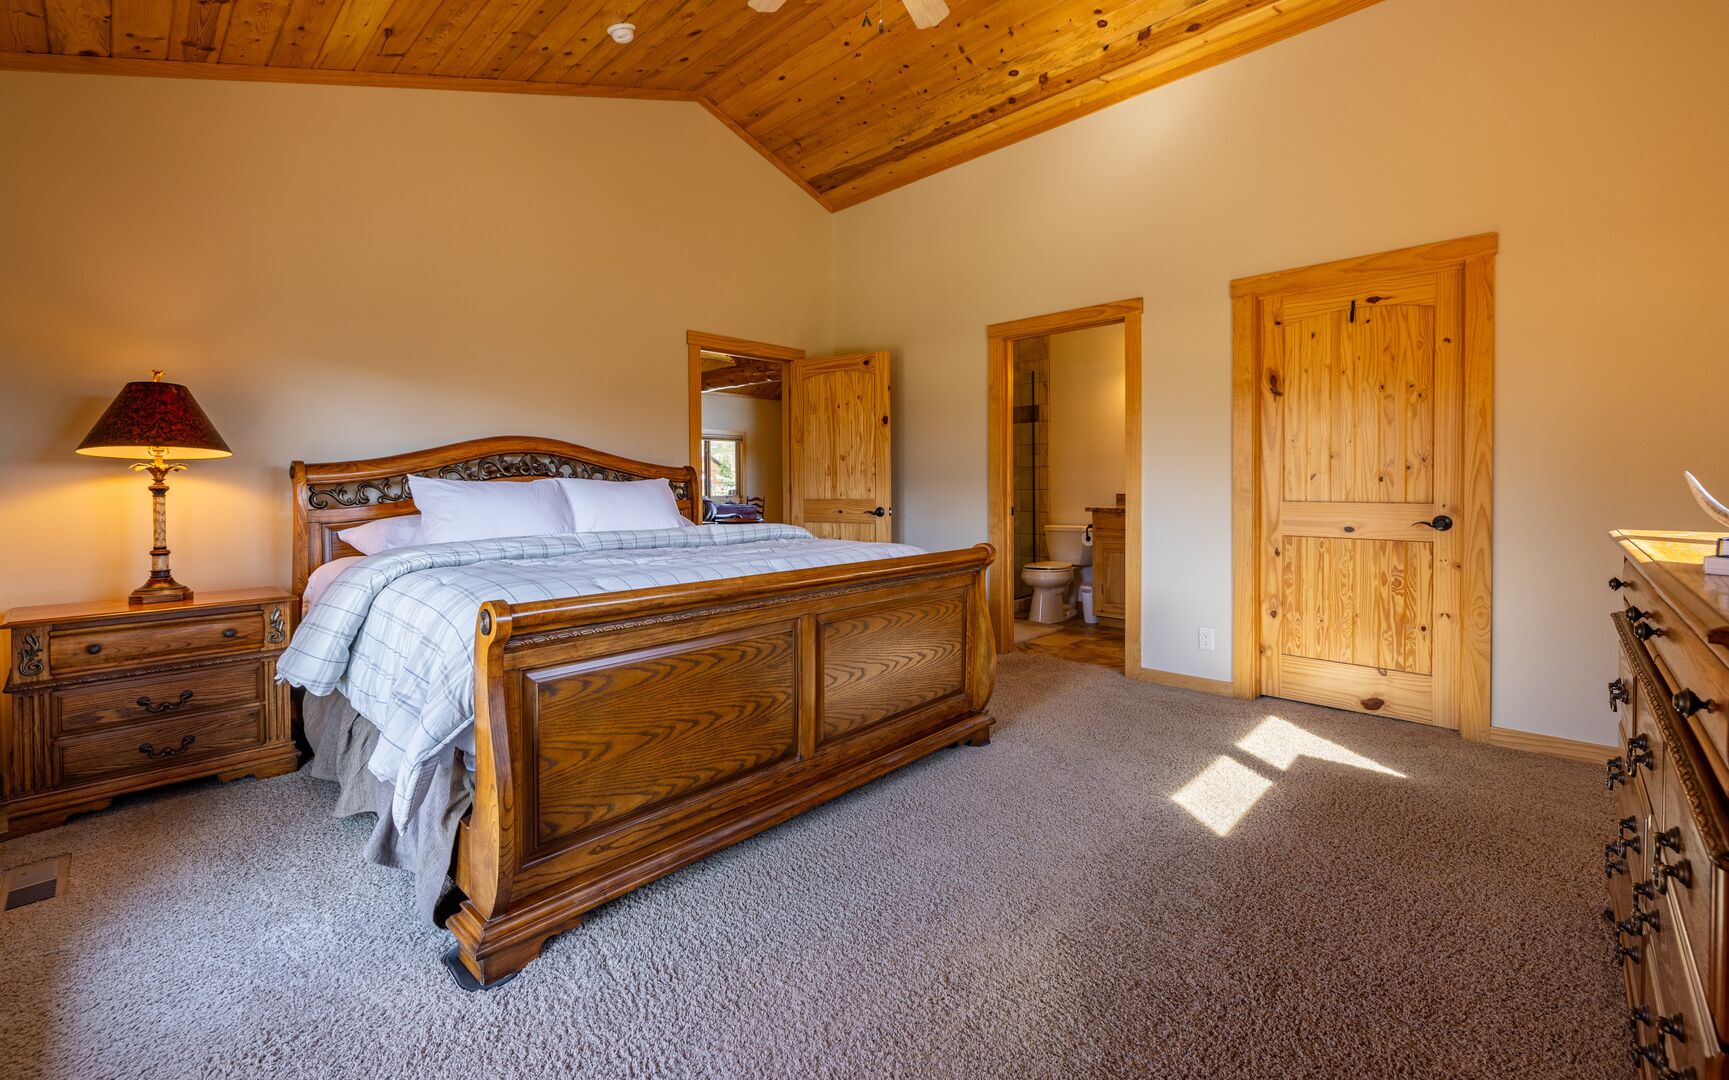 Main bedroom suite with king bed and attached bathroom